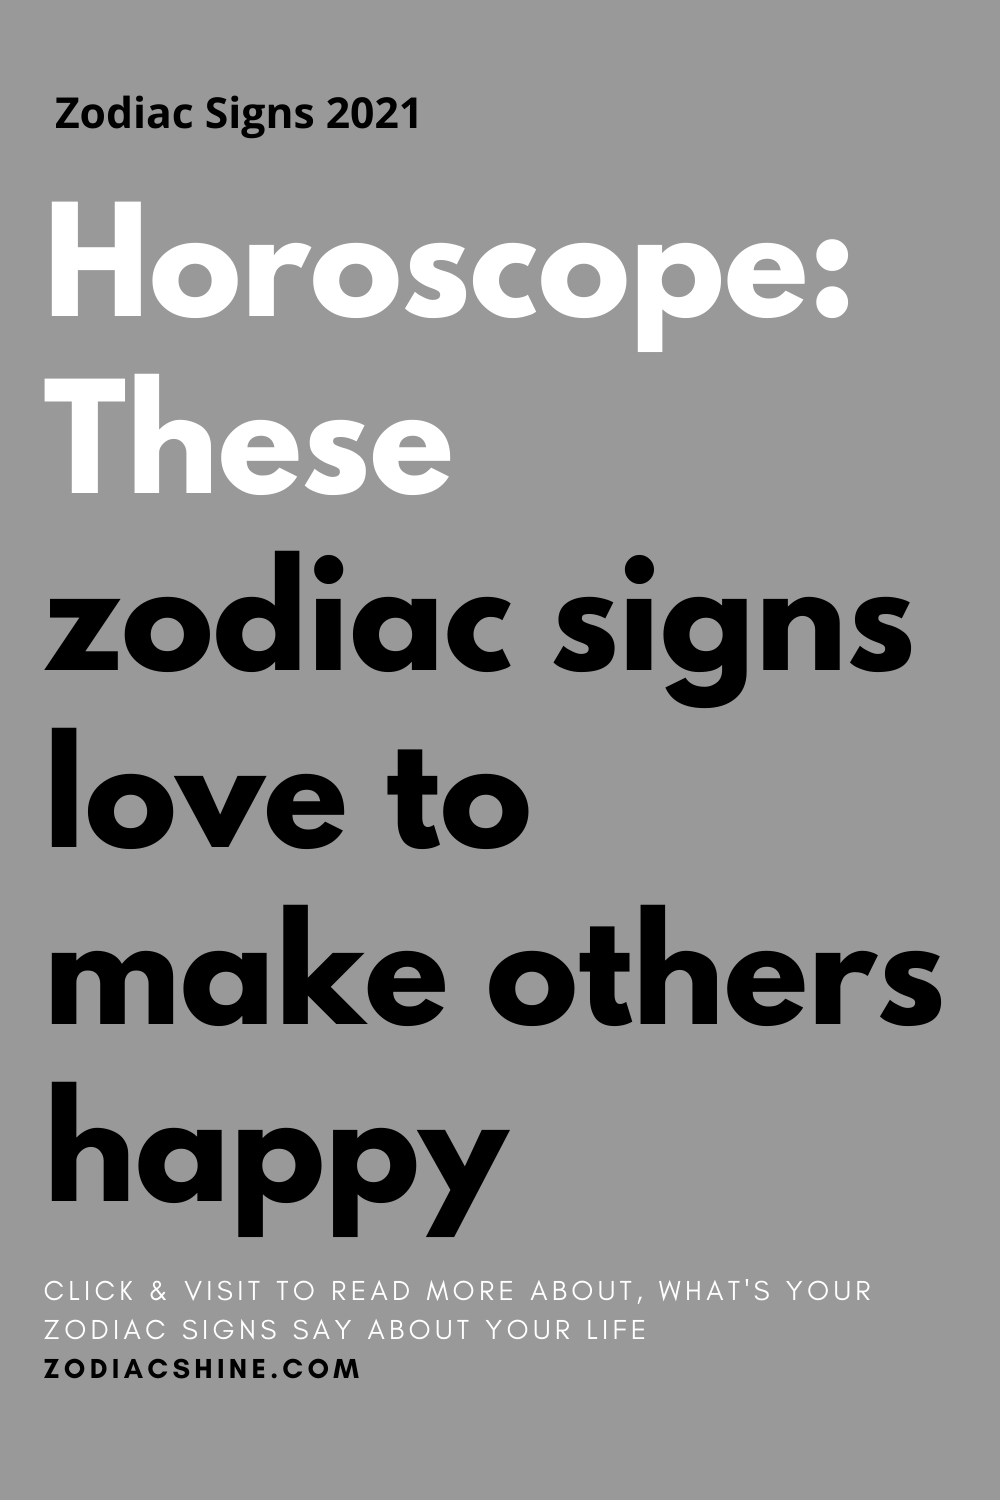 Horoscope These zodiac signs love to make others happy